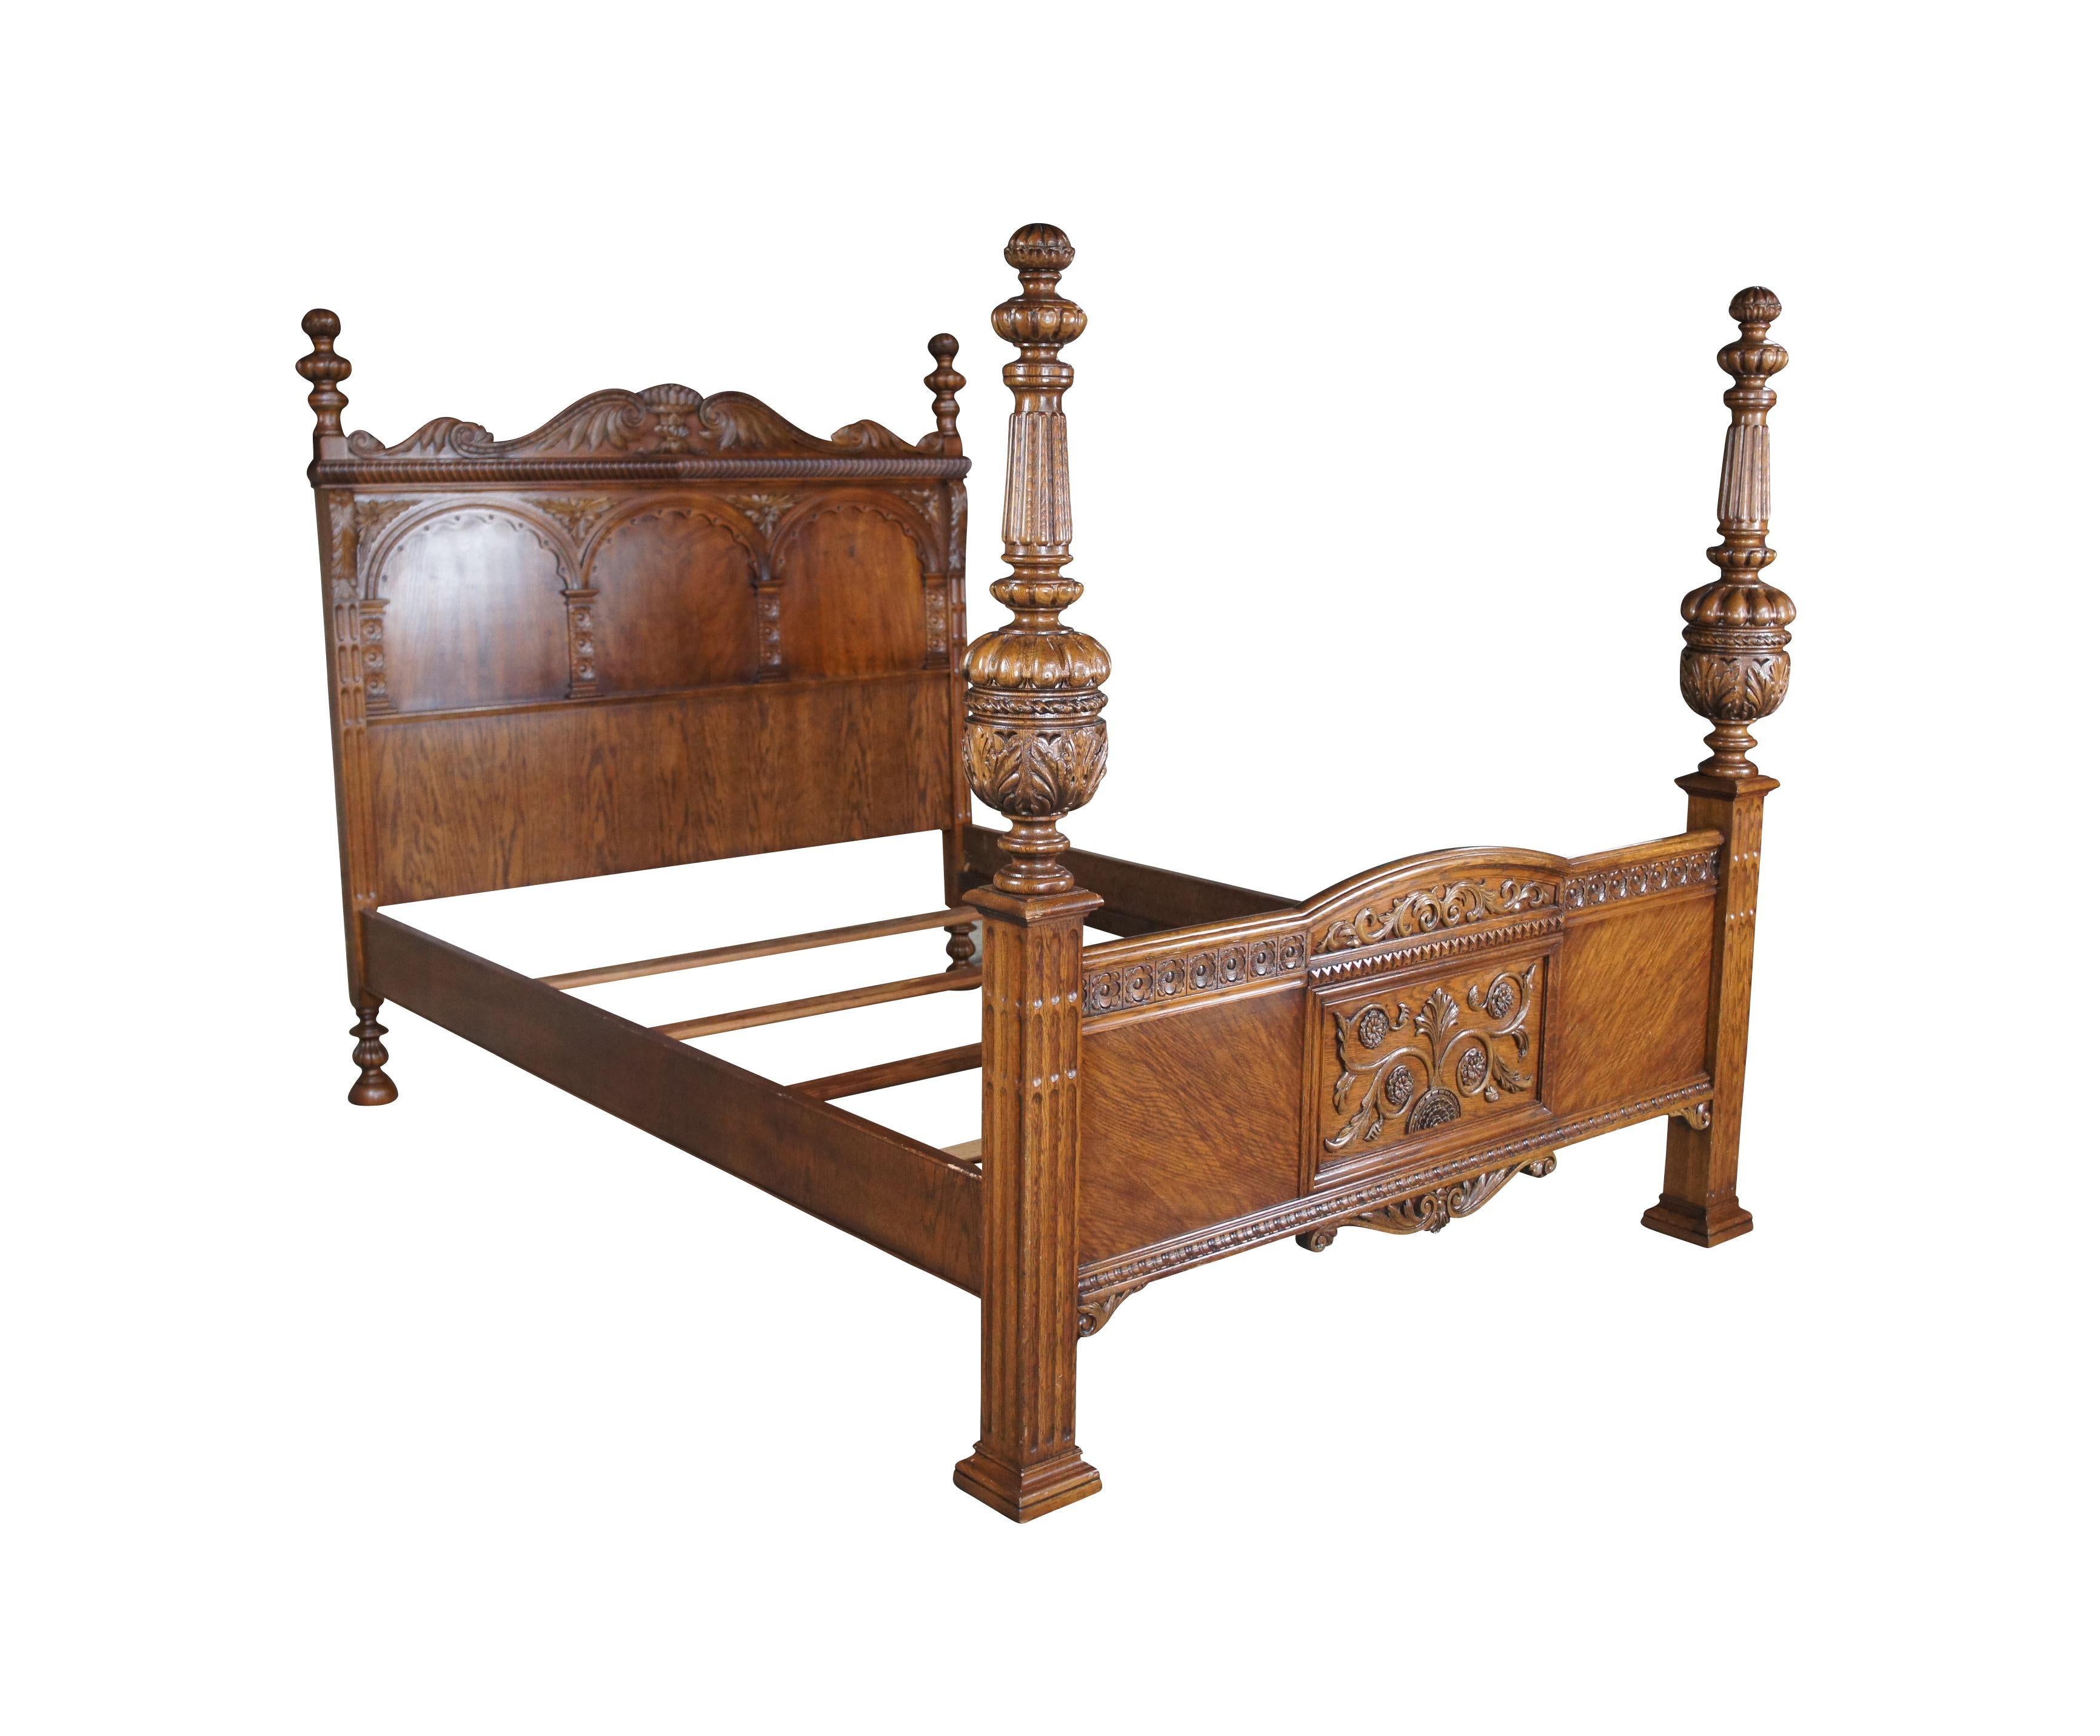 Antique American Furniture Elizabethan Jacobean Revival Oak Full Size Poster Bed In Good Condition For Sale In Dayton, OH